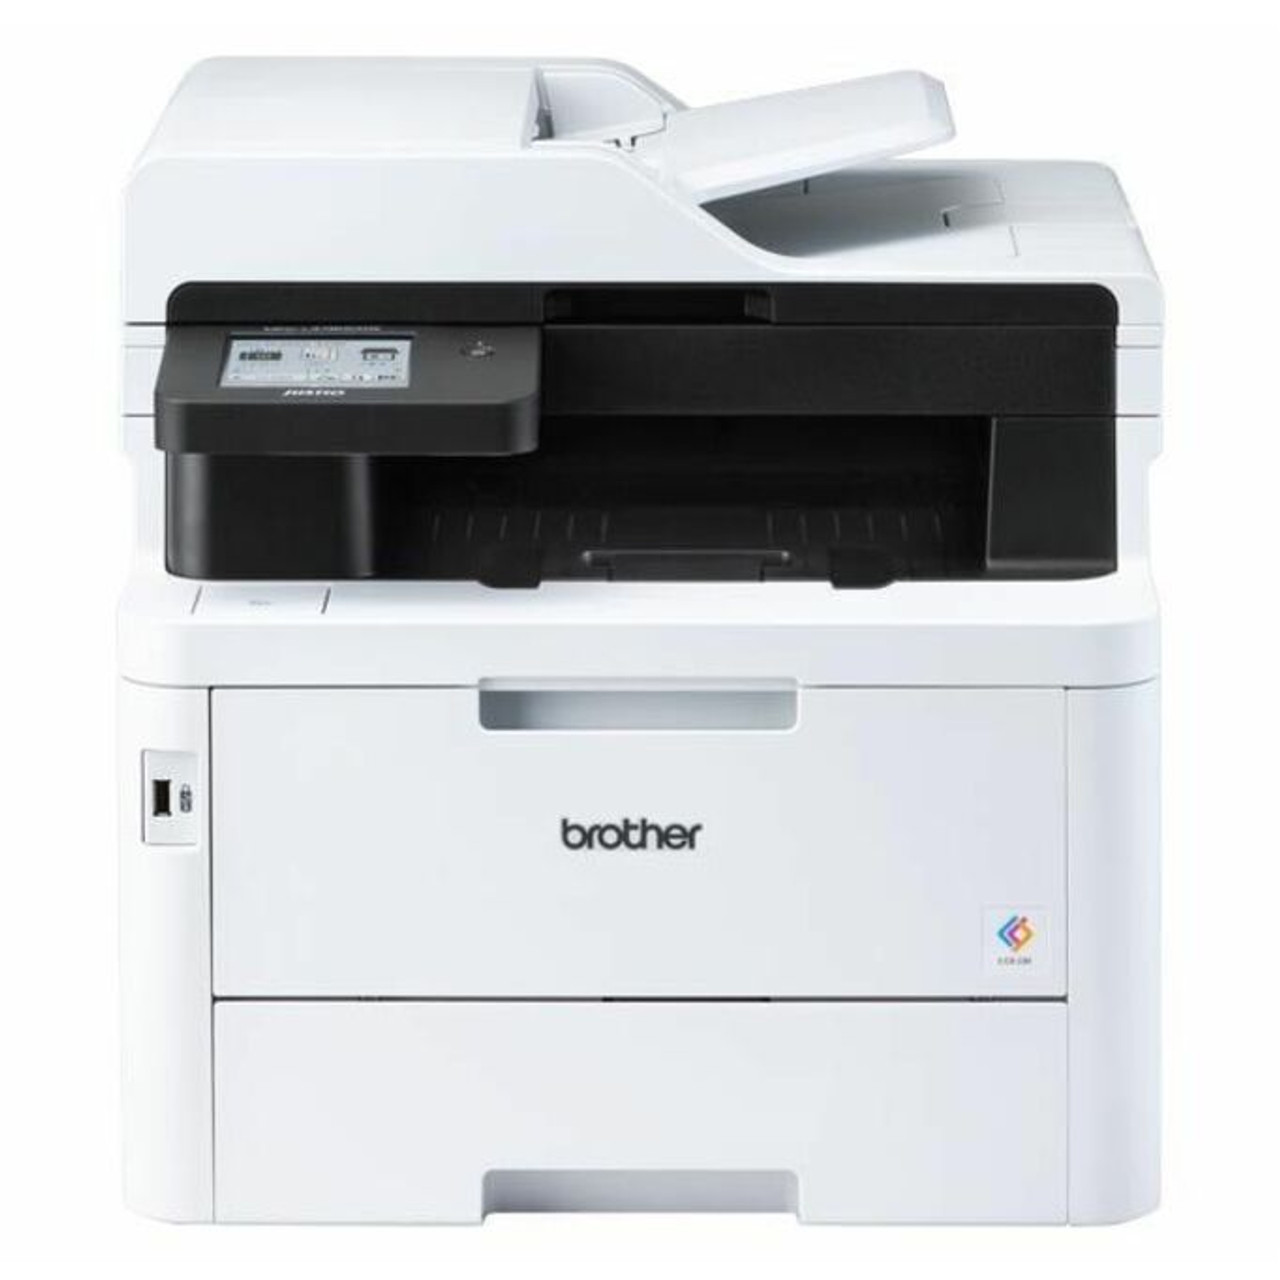 Brother MFC-L3780CDW Wired & Wireless Laser Multifunction Printer - Color